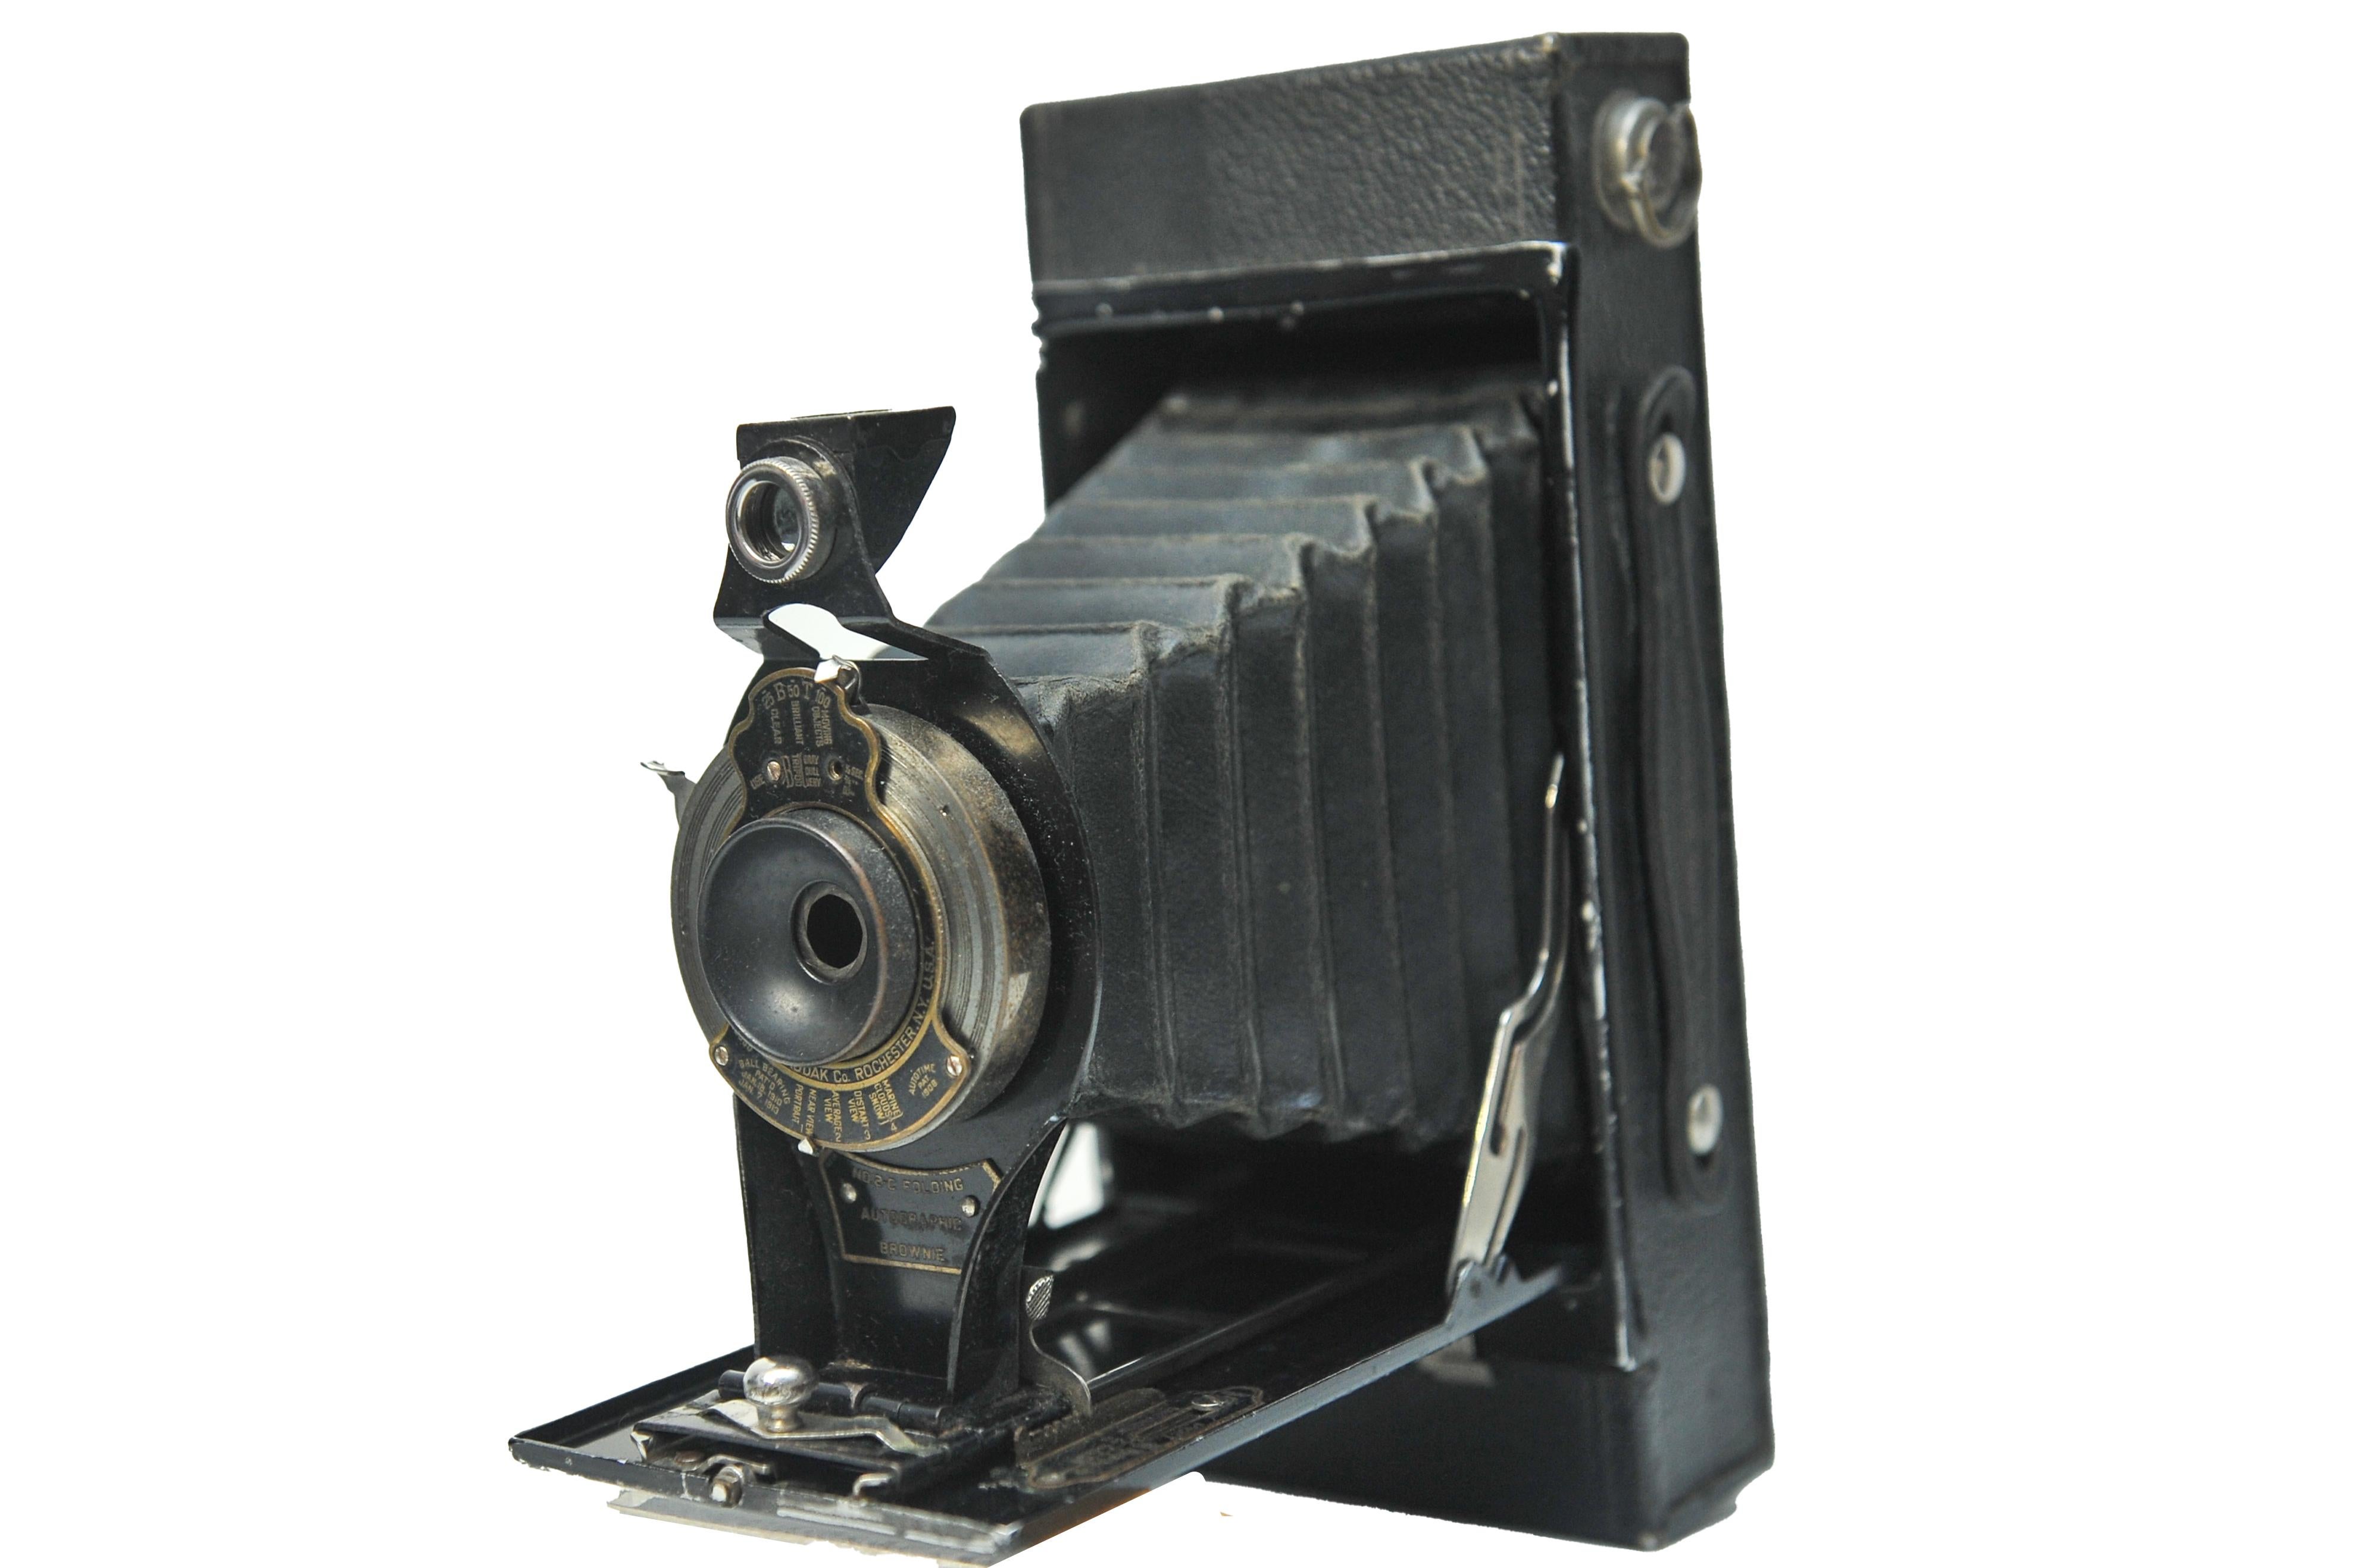 Eastman Kodak Co. Rochester NY USA No. 2C Folding Autographic Brownie Folding Below Camera Within a Rarer Square Ended Case

Takes 130 Film 

Introduced: May 1916
Discontinued: 1926